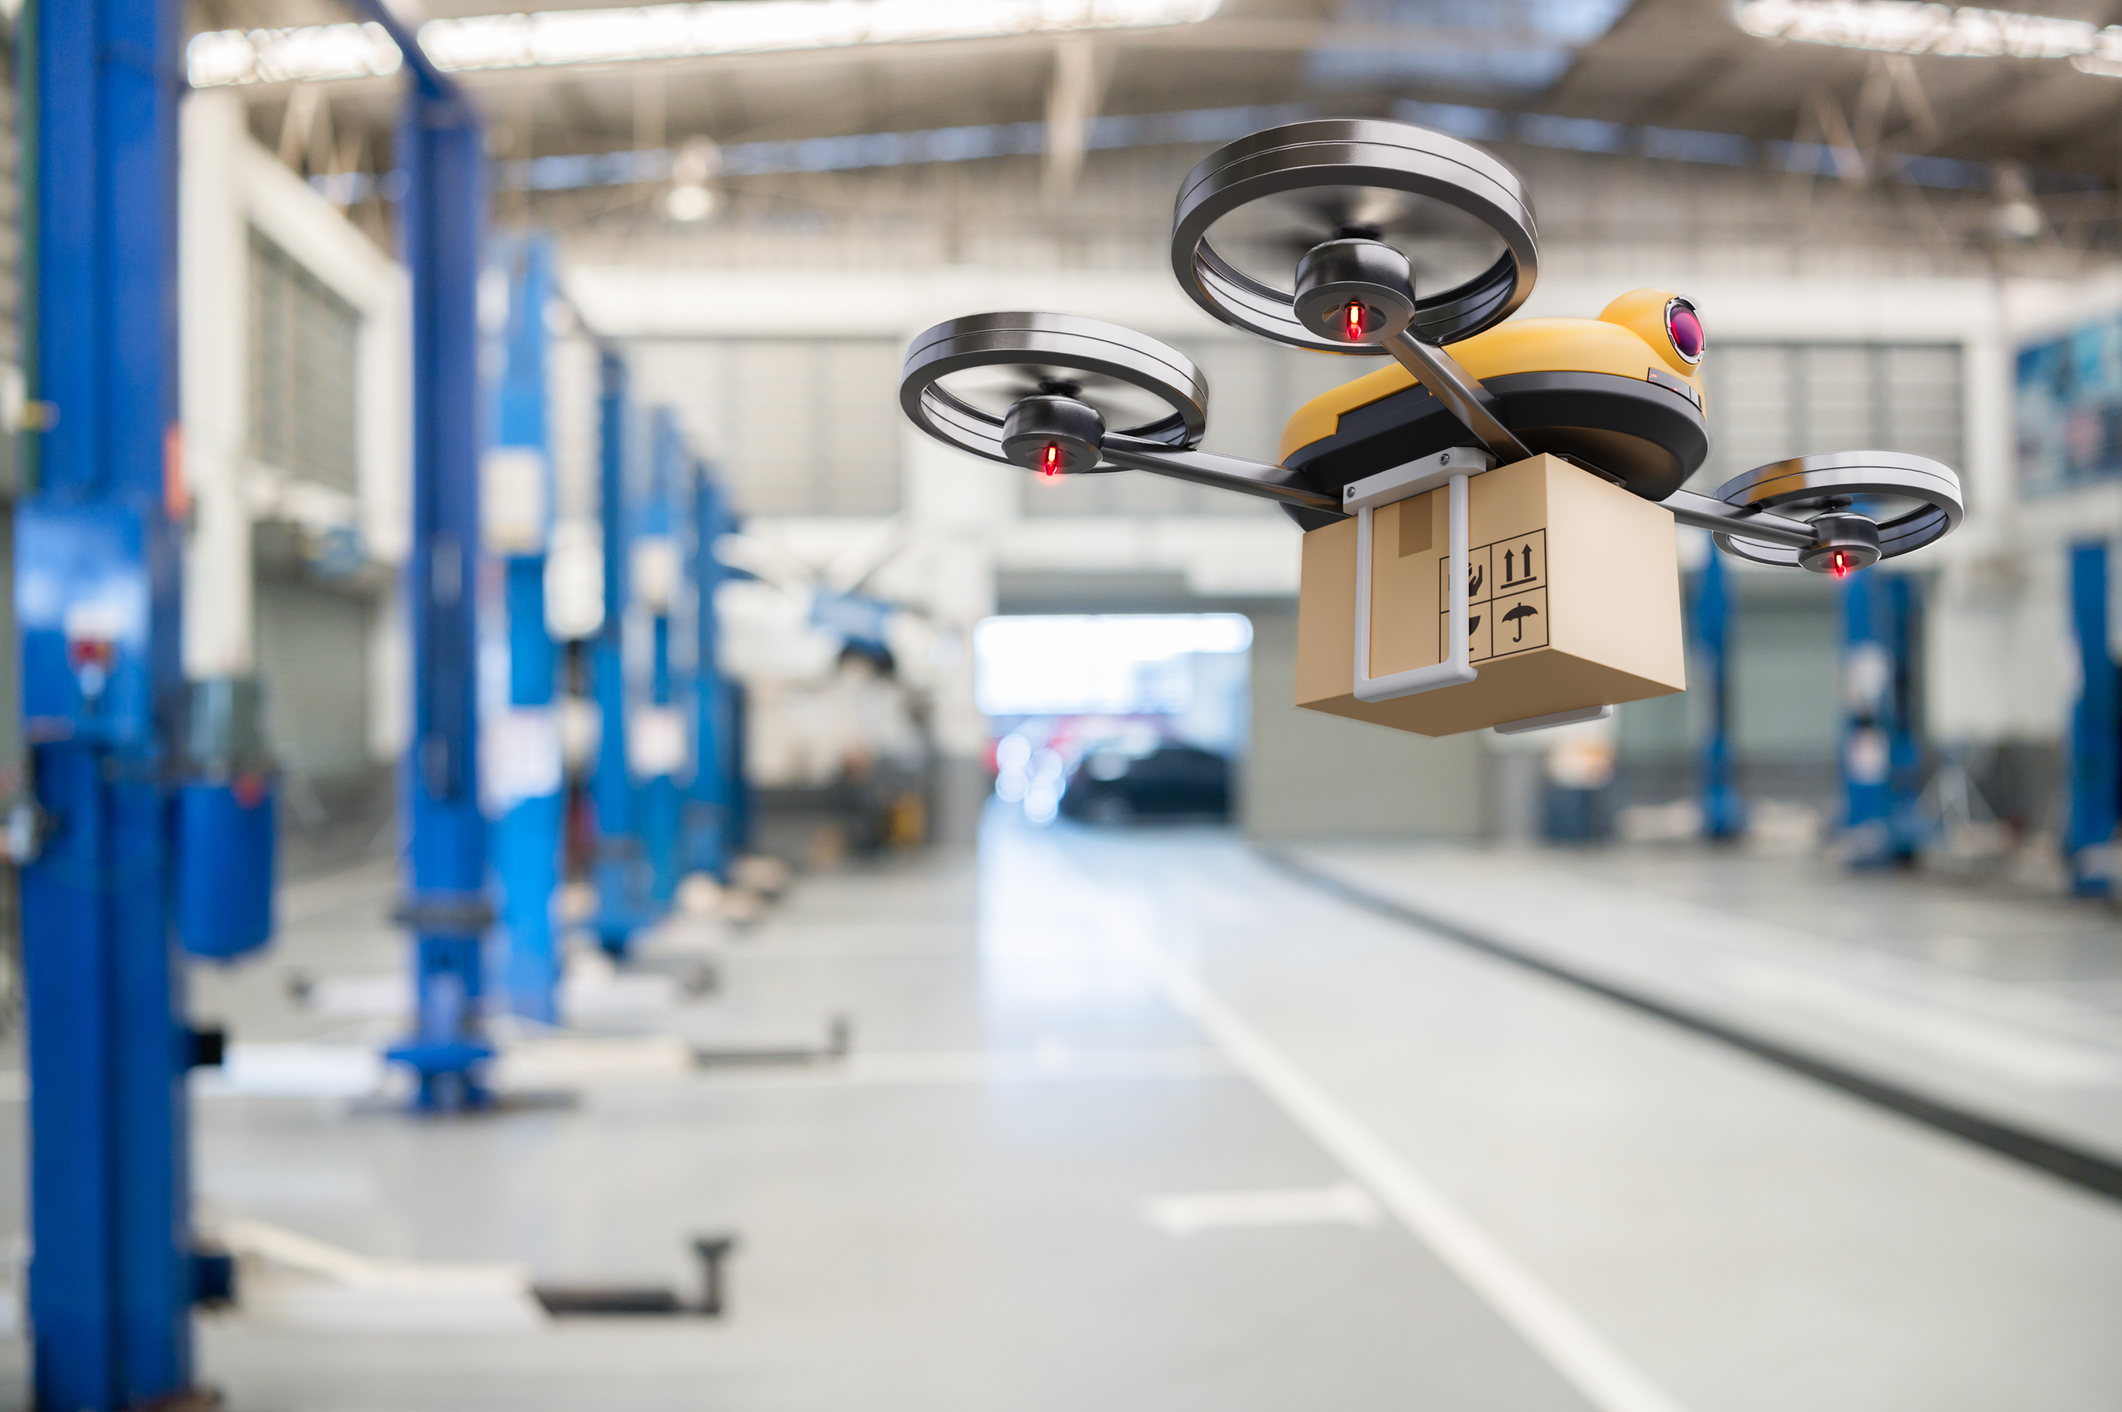 Spare part delivery drone at garage storage in leading automotive car service center for delivering mechanical shipping component part assembling to customer. Modern innovative technology and gadget